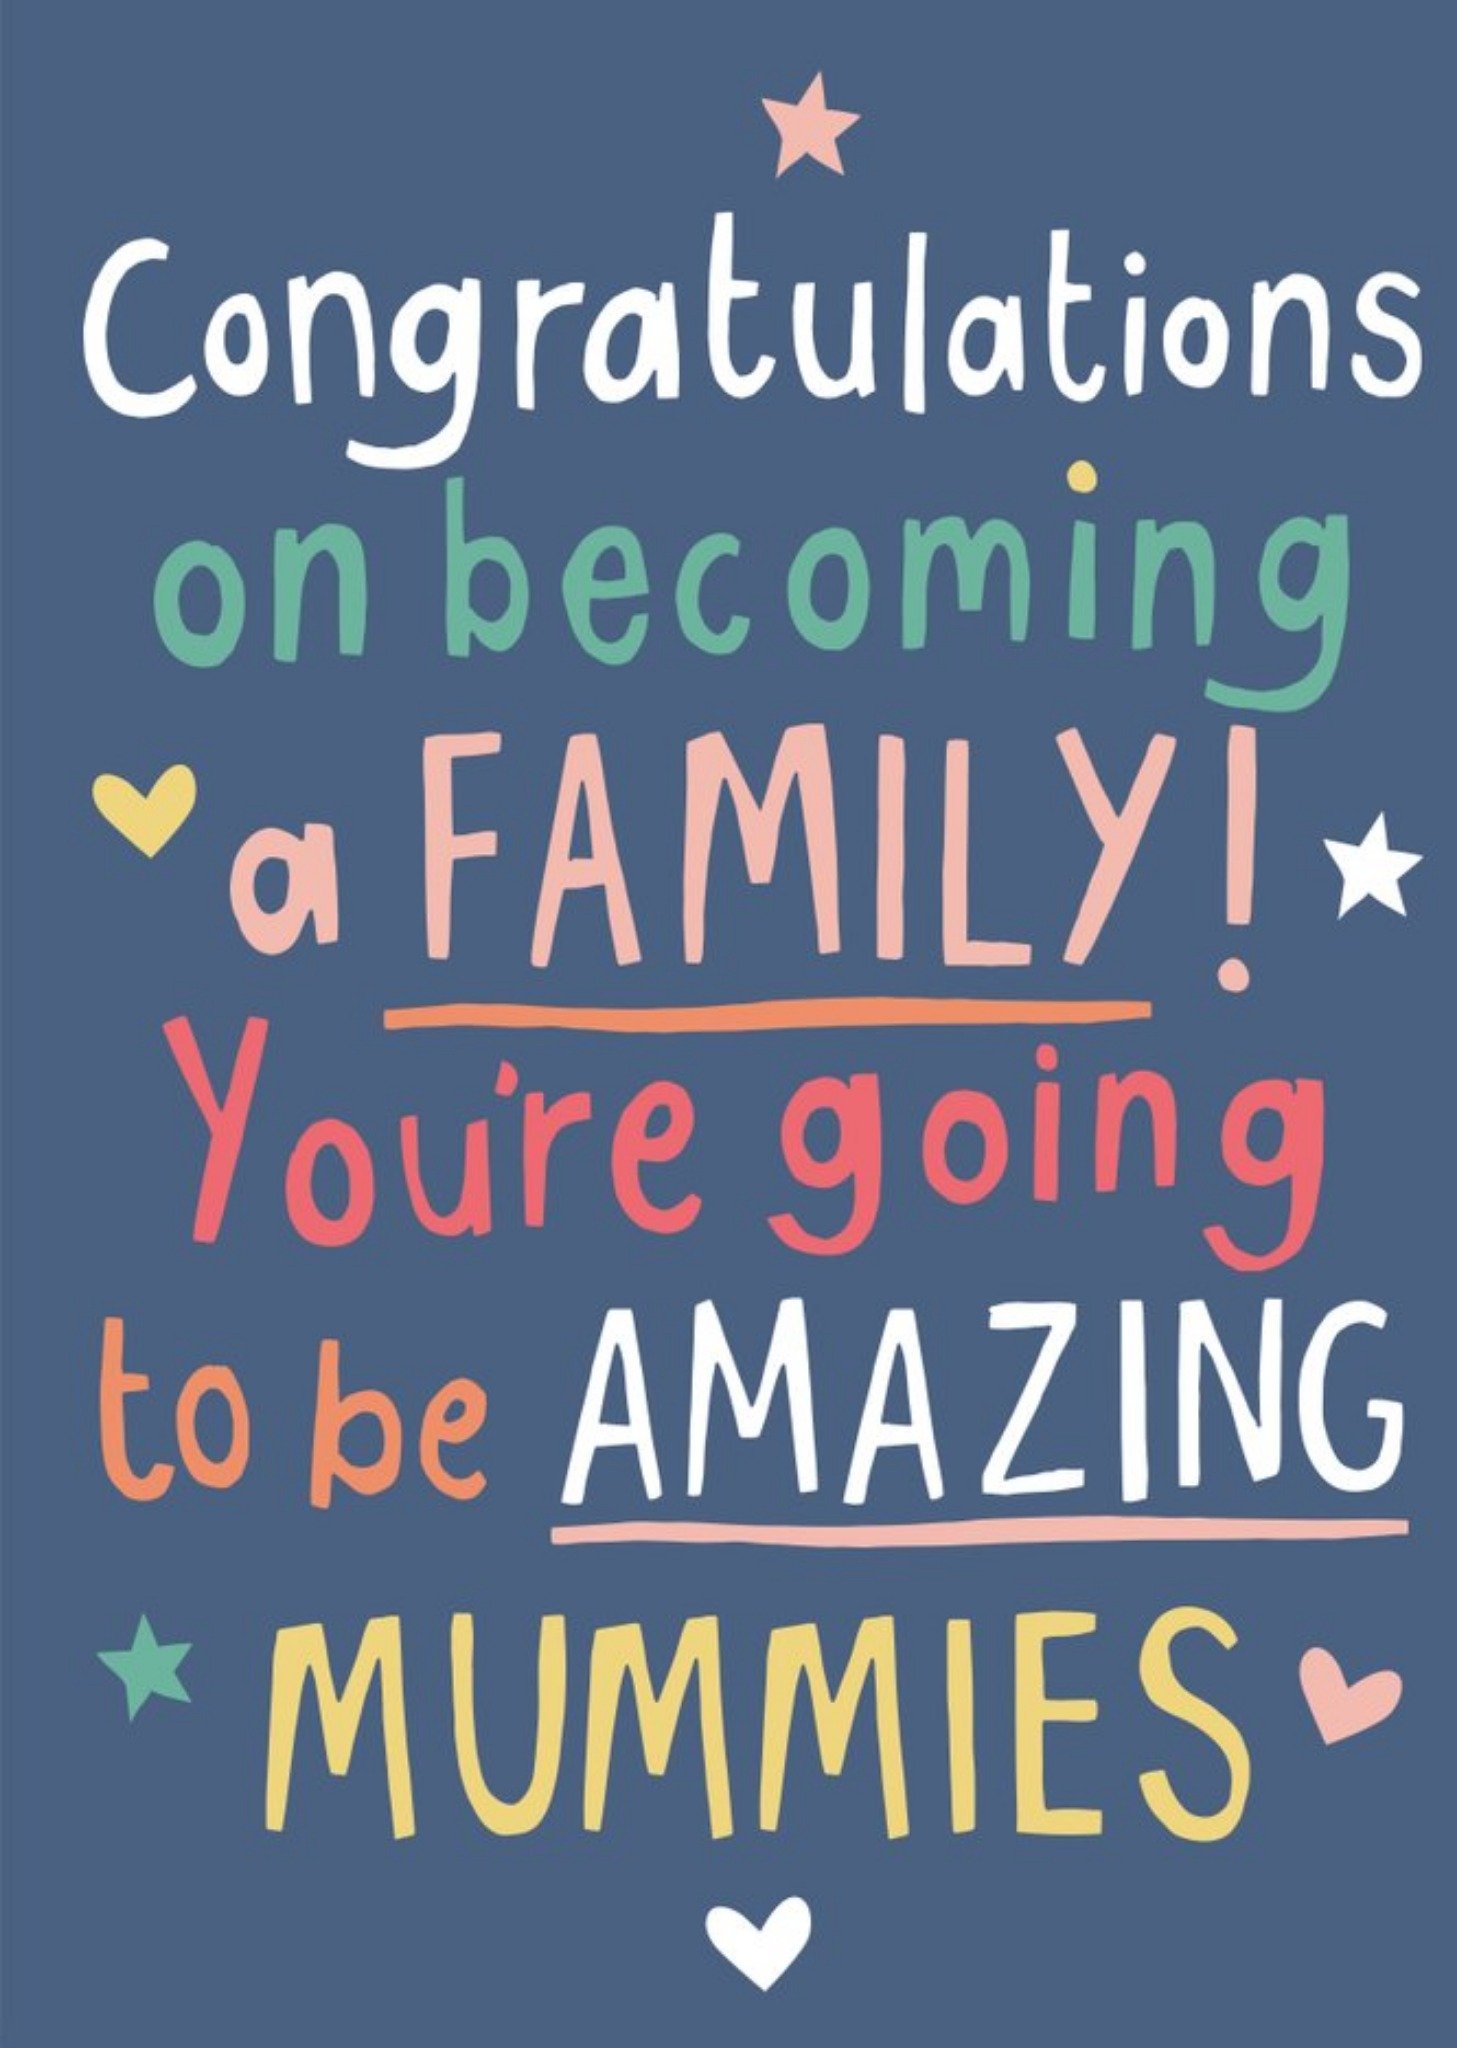 Moonpig Typographic Congratulations On Becoming A Family Youre Going To Be Amazing Mummies Card Ecar